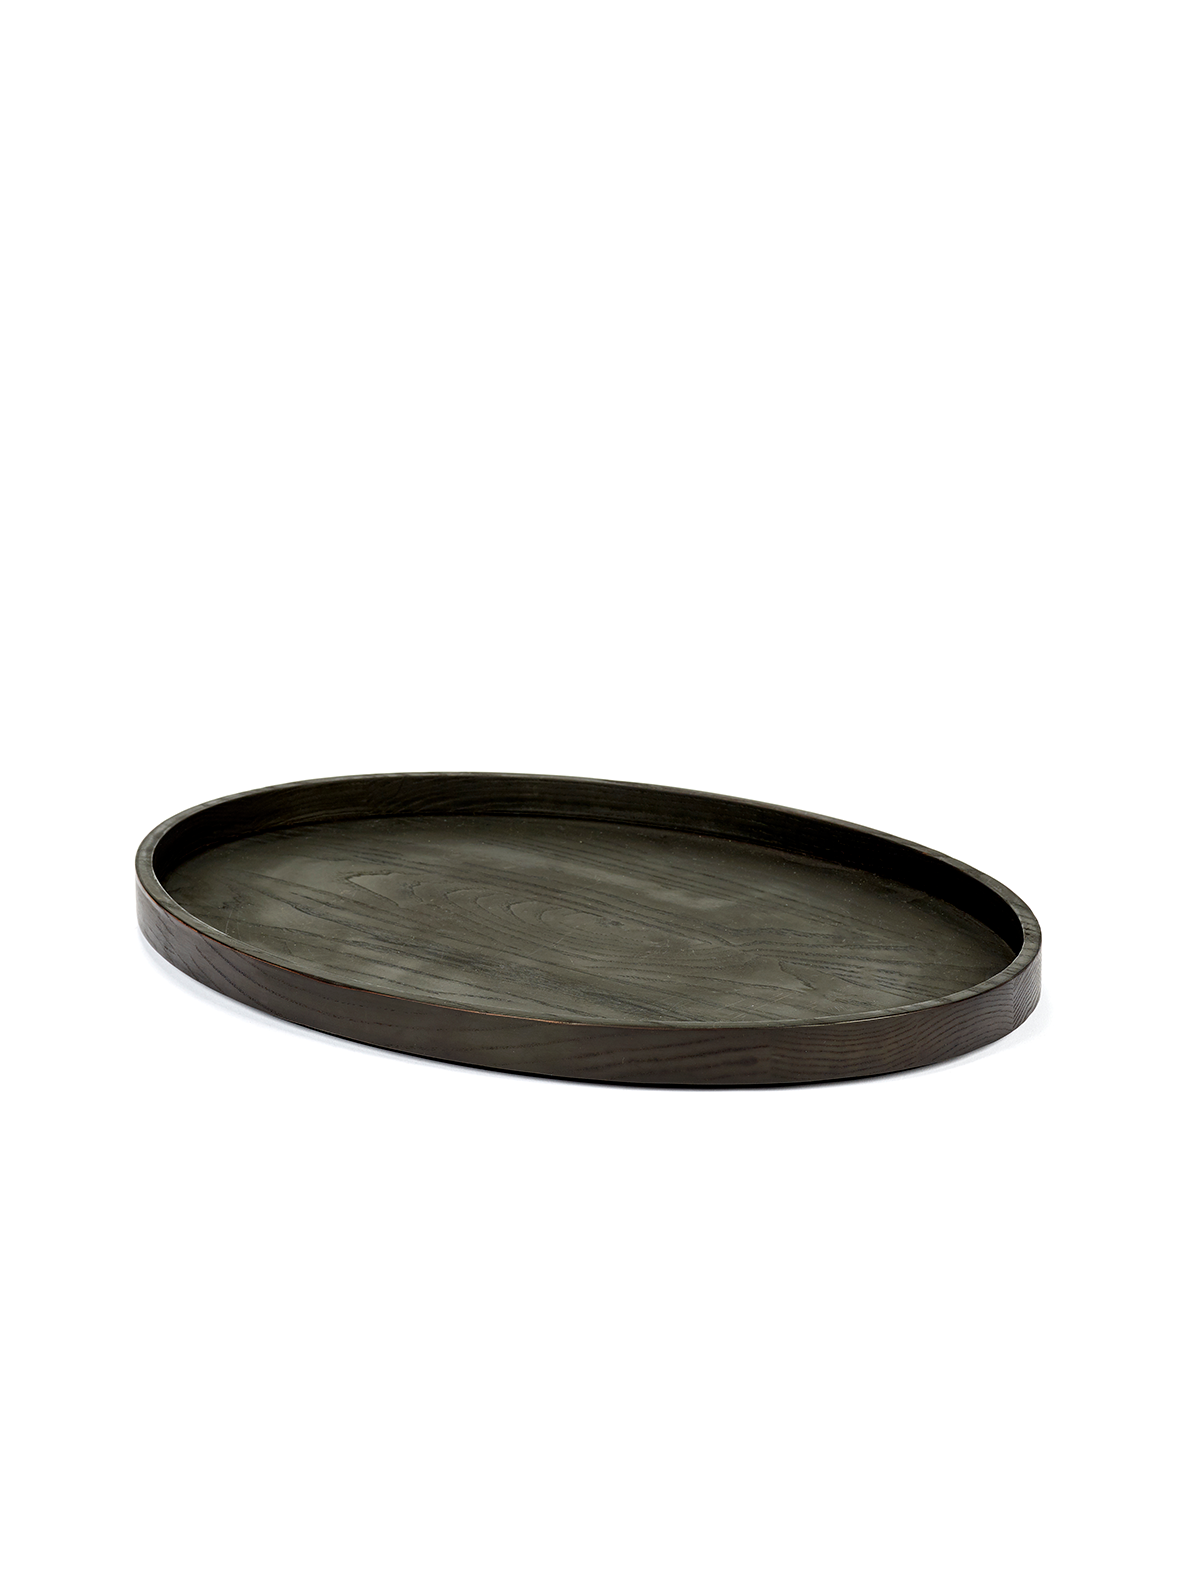 Oval tray wood Passe-partout by Vincent Van Duysen